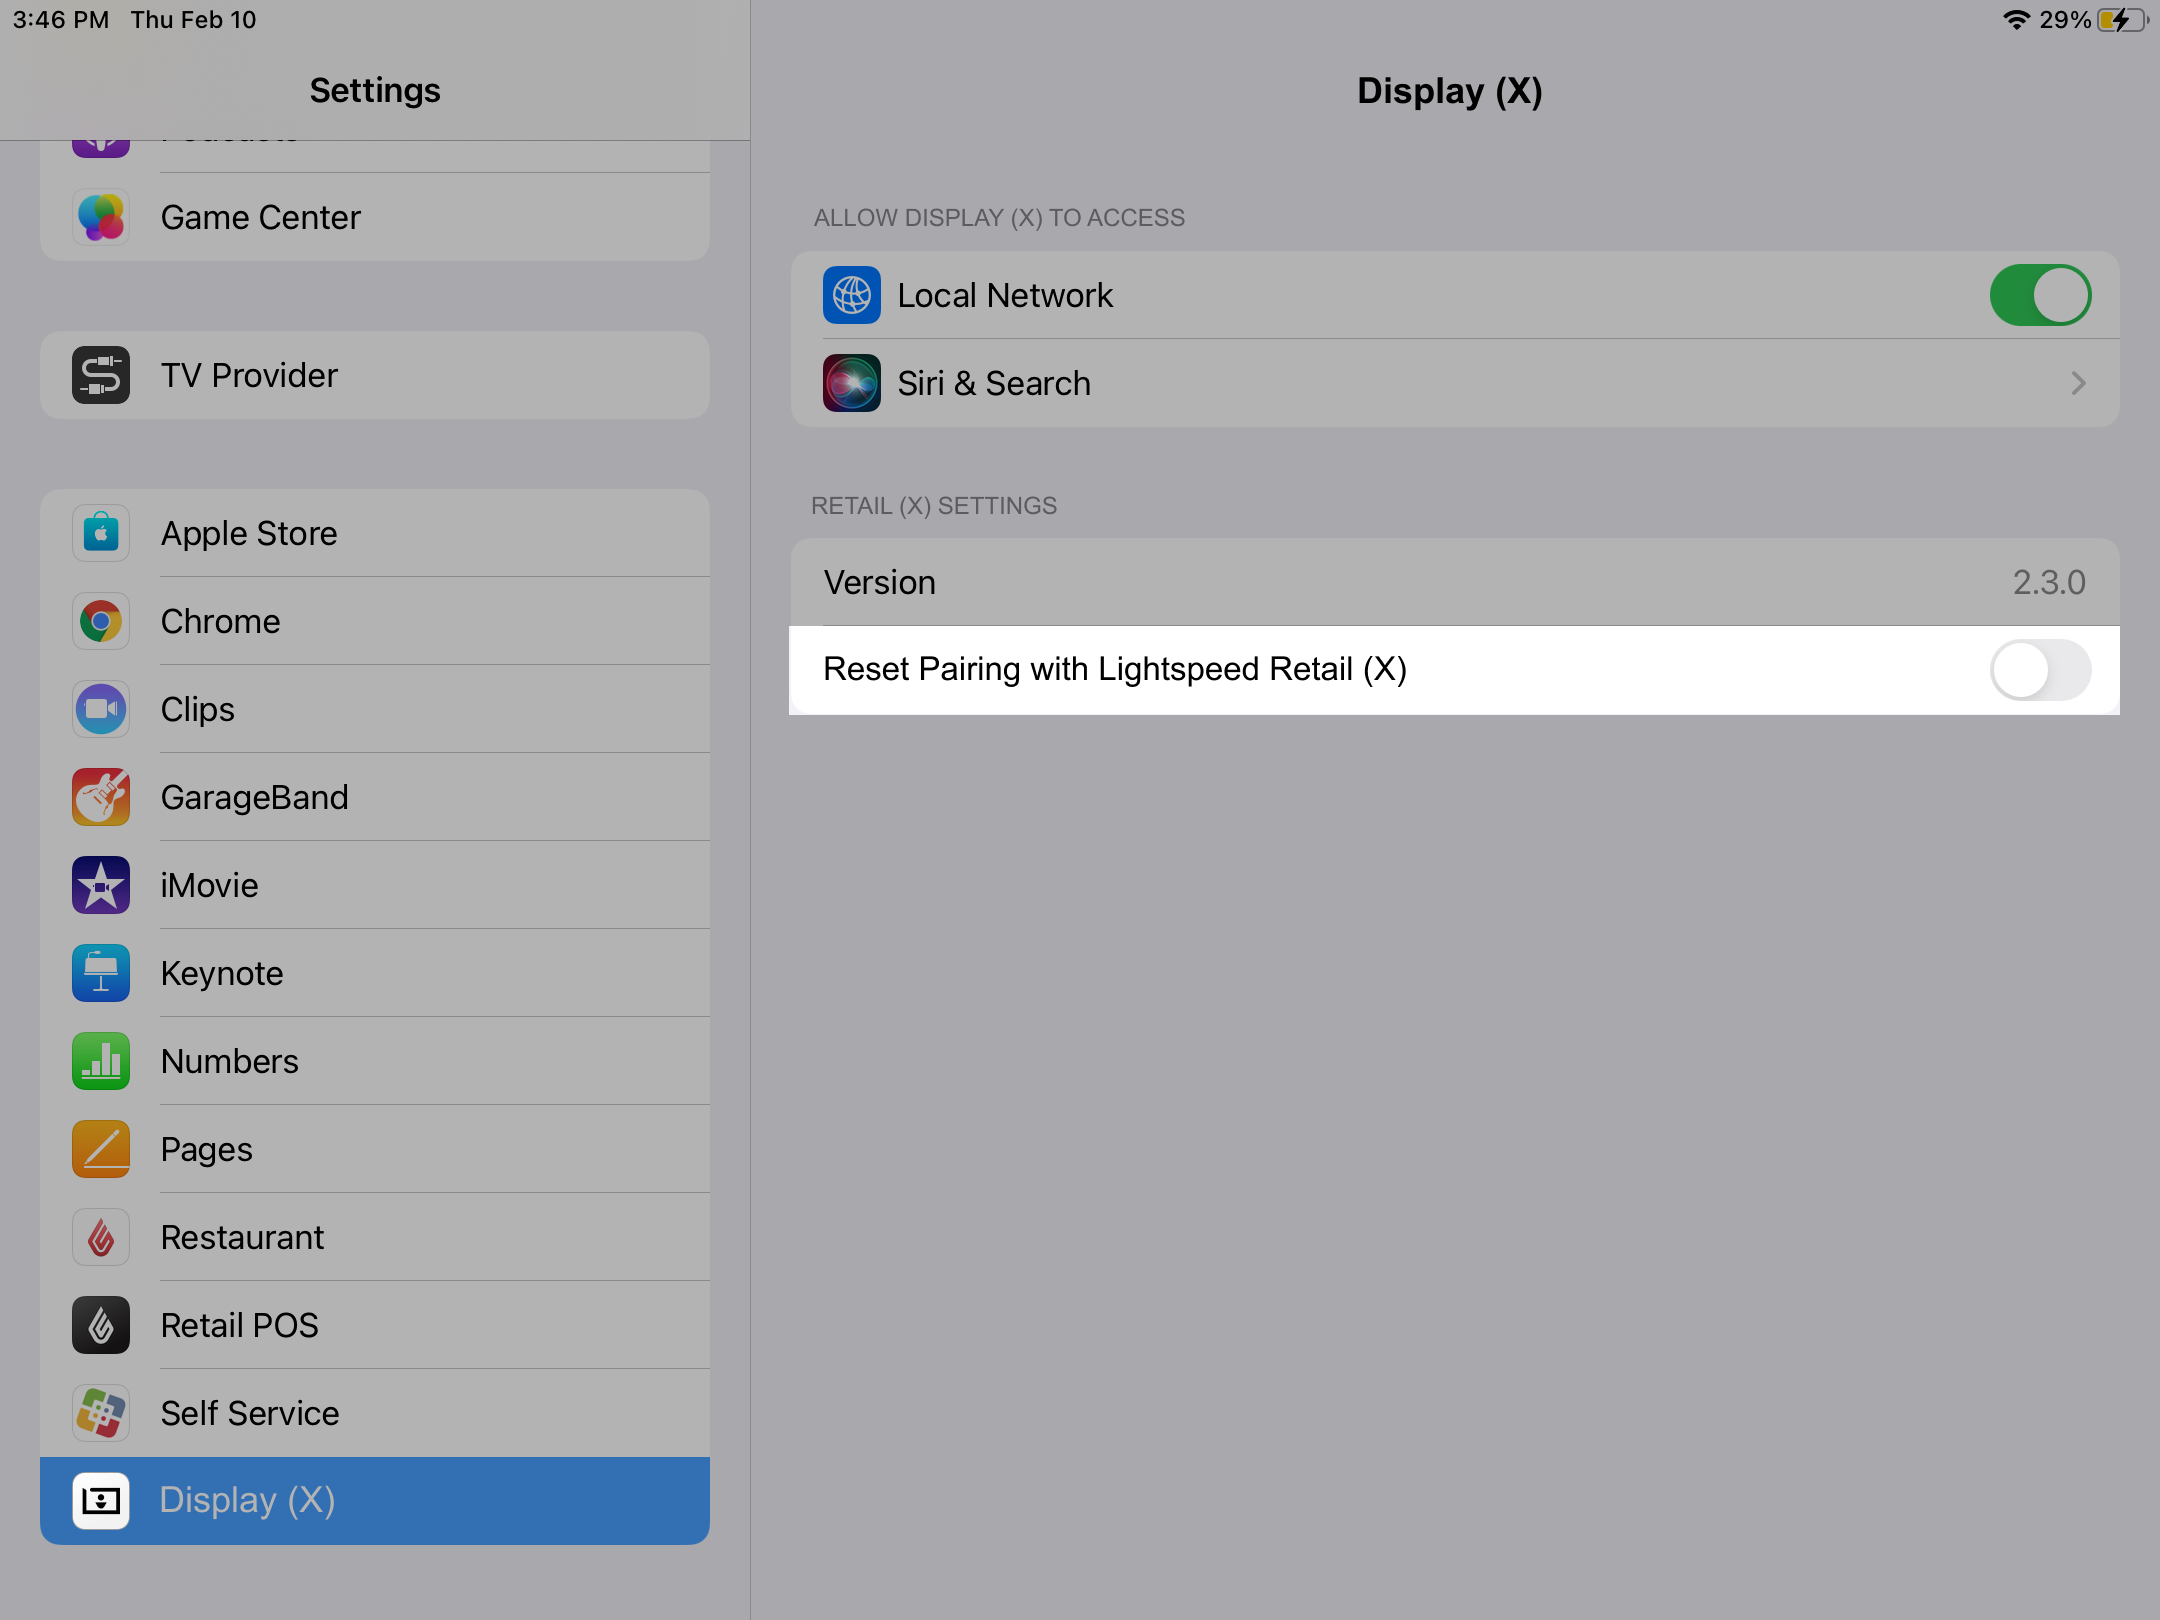 reset_pairing_with_Retail_X_toggle_in_iPad_settings.png